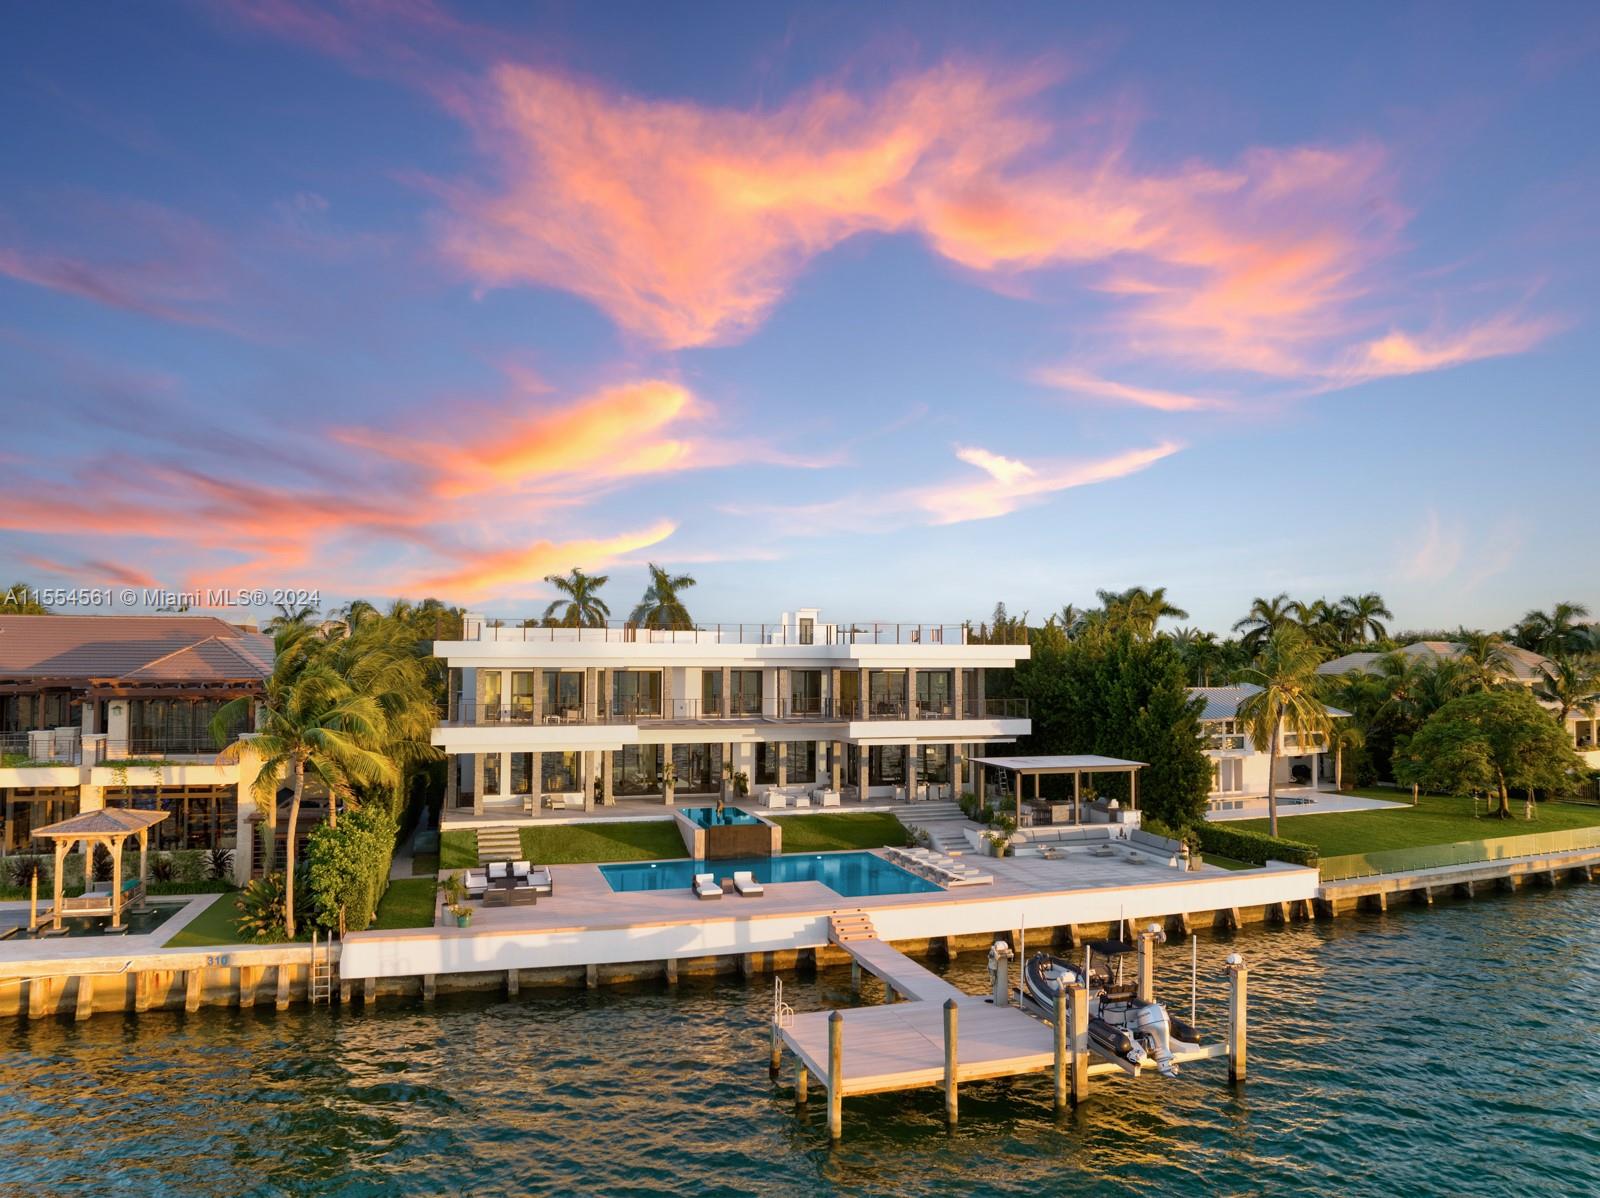 Designed by world-renowned architect Ramon Alonso of Miami-based Studio Radyca. He is behind the designs of some of the world’s most exciting homes, yachts, and planes. Completed in 2014, this home sits directly on Biscayne Bay with 120 ft of water frontage. Boasting what is probably the most exciting residential water view of Miami’s Downtown Skyline, and stunning open bay sunsets. This home features a private dock, rooftop pickleball court, expansive balconies, soaring ceilings, and unobstructed wide water views from virtually every room. A complete bonus entertainment level including a full gym, spa, sauna, and home theater. Designed for large-scale indoor and outdoor entertaining.